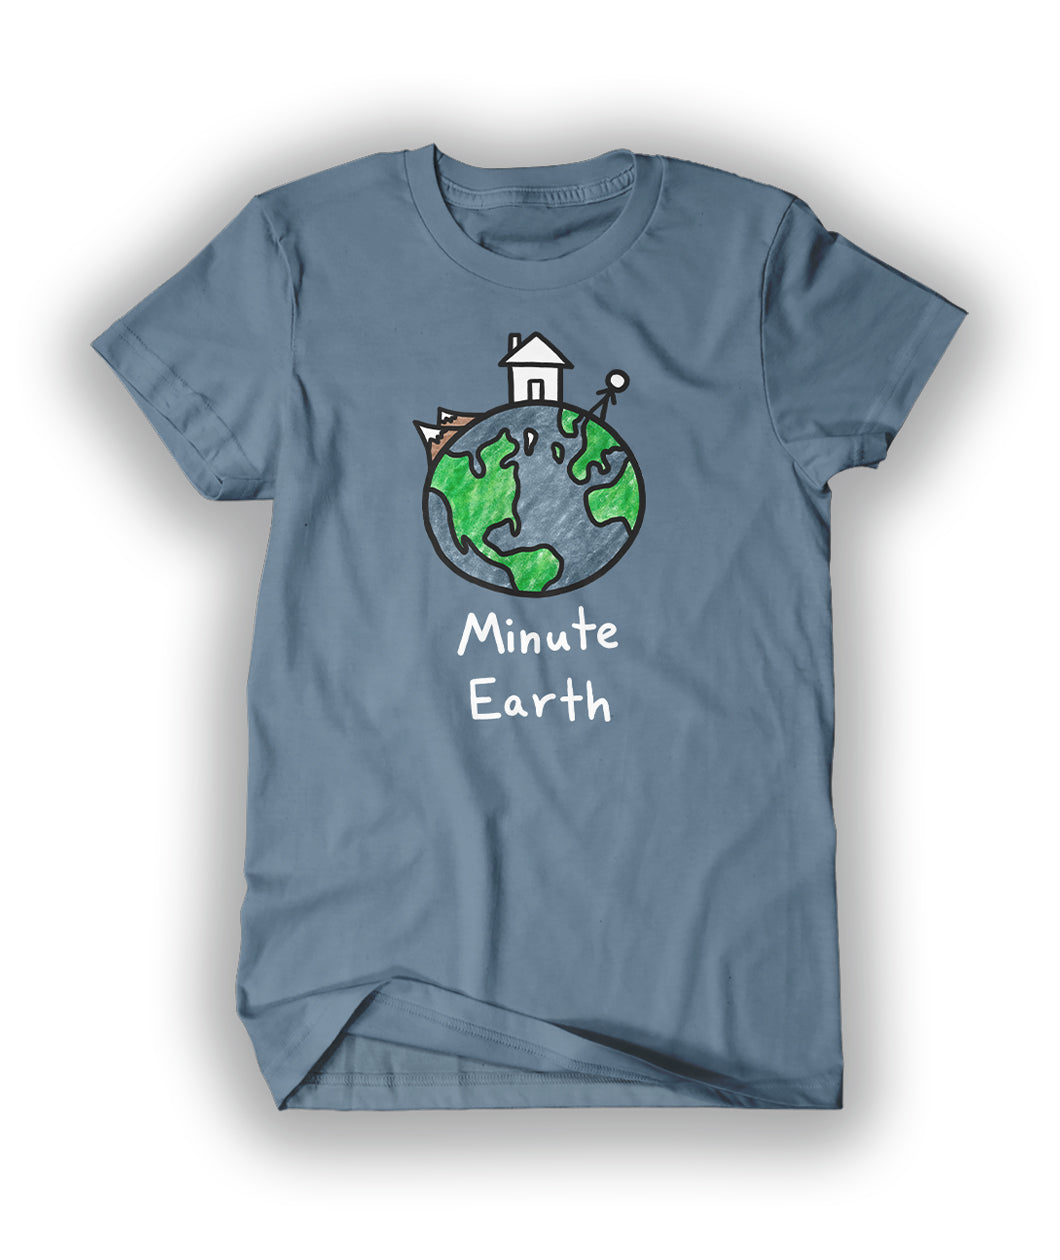 A blue t-shirt with a drawing of earth on it with a house, mountains and a stick figure on top and "Minute Earth" below. 